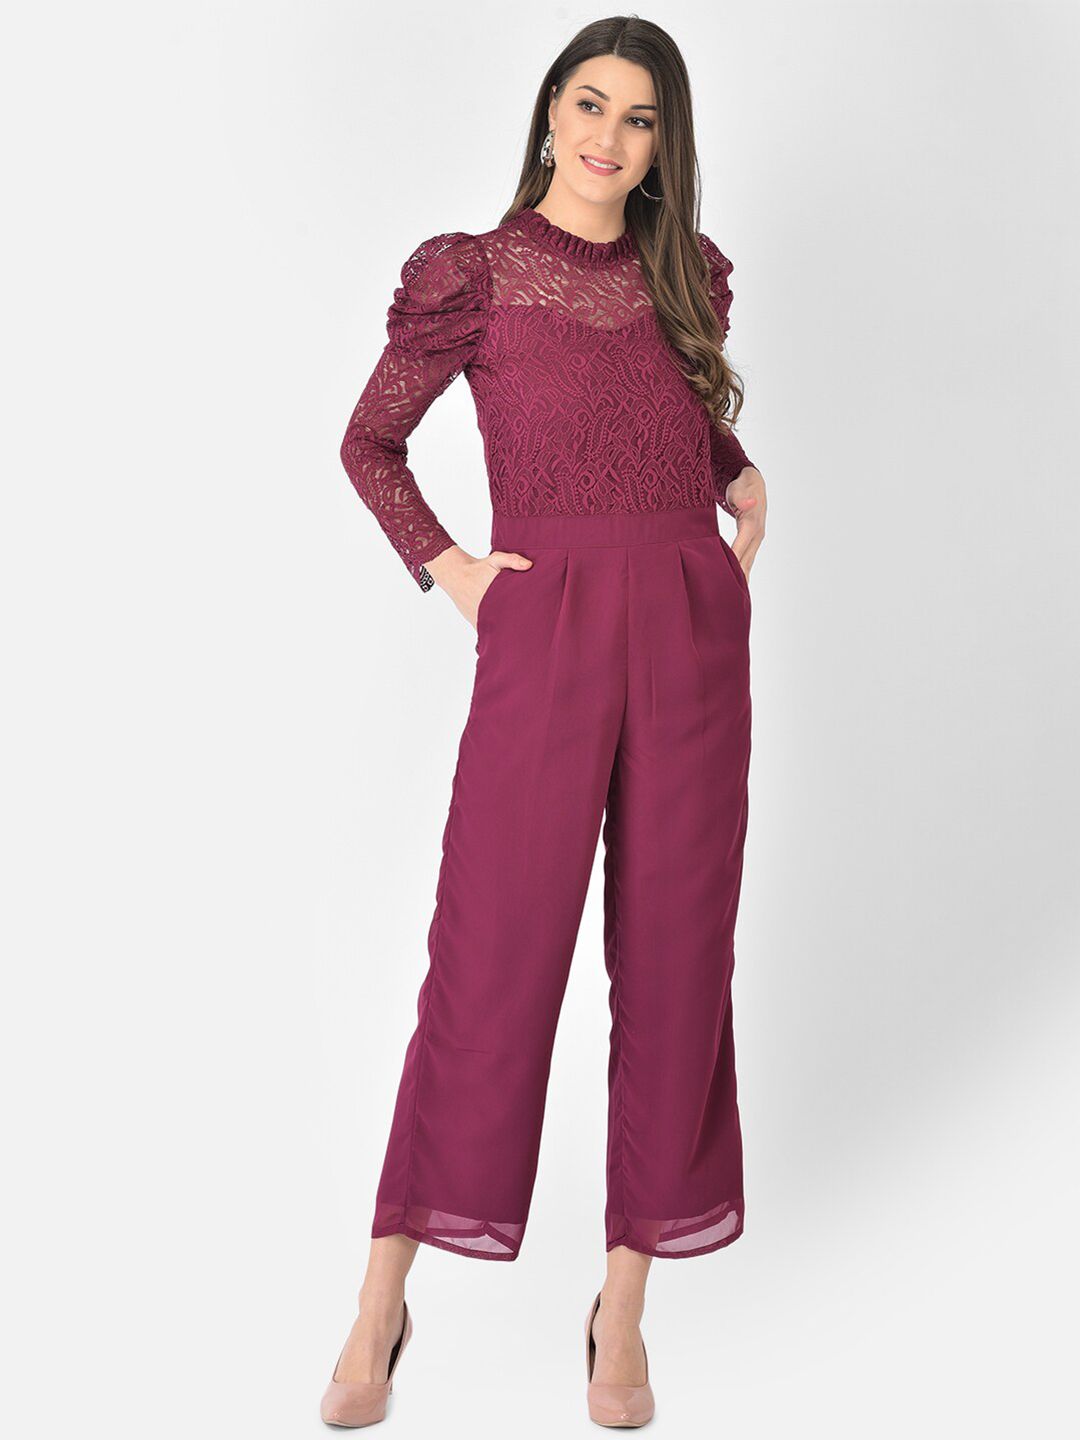 Eavan Burgundy Basic Jumpsuit with Lace Inserts Price in India